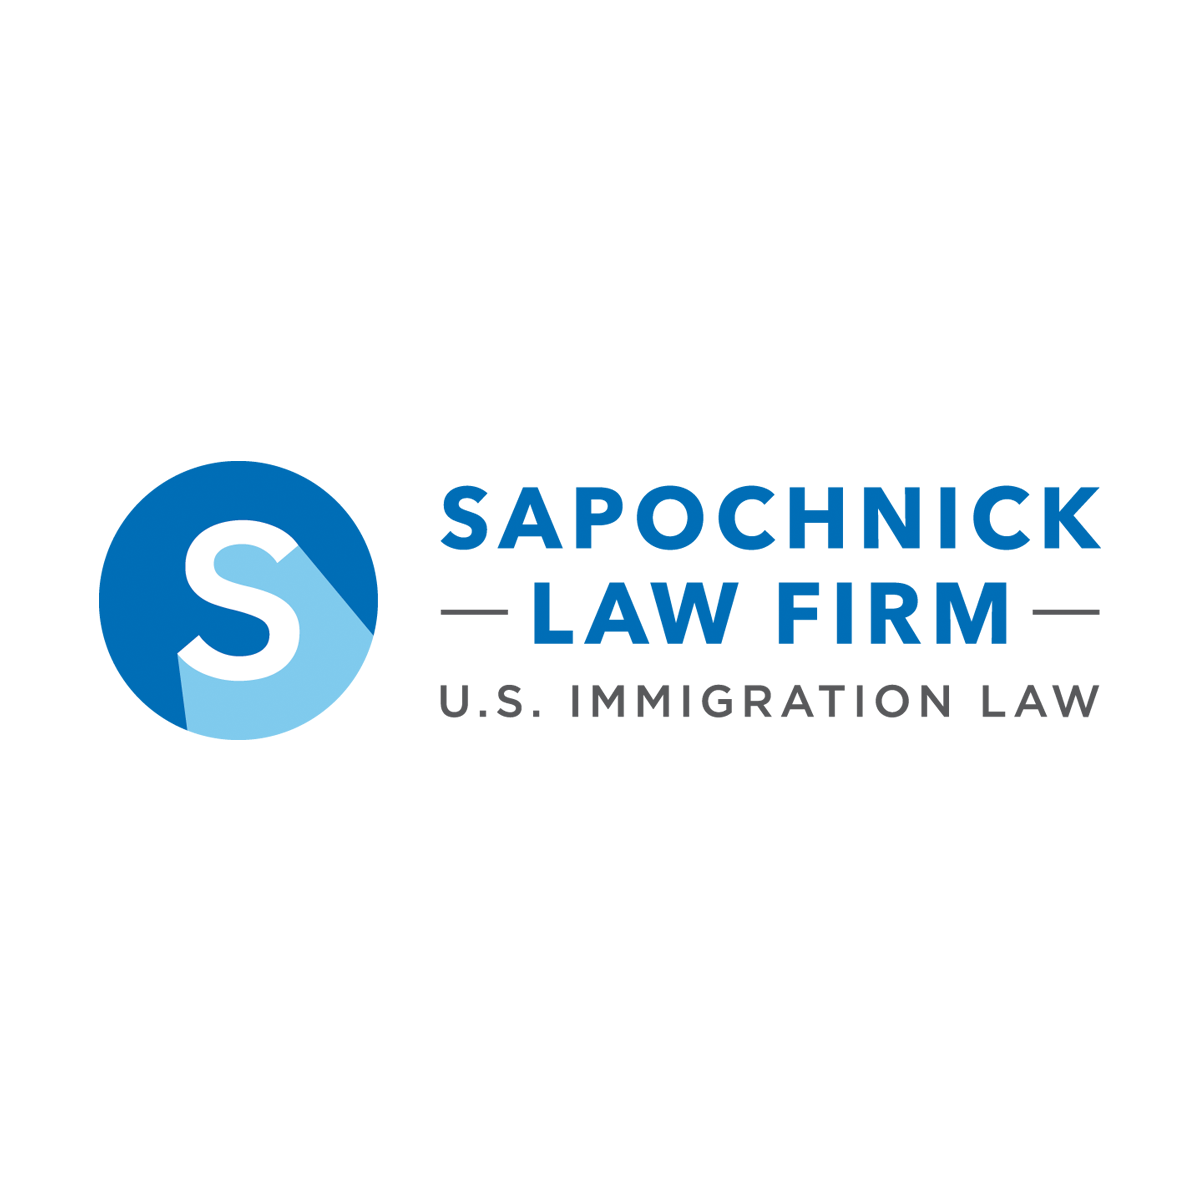 Immigration Update: Statistics on USCIS Backlog and Processing Delays 2022